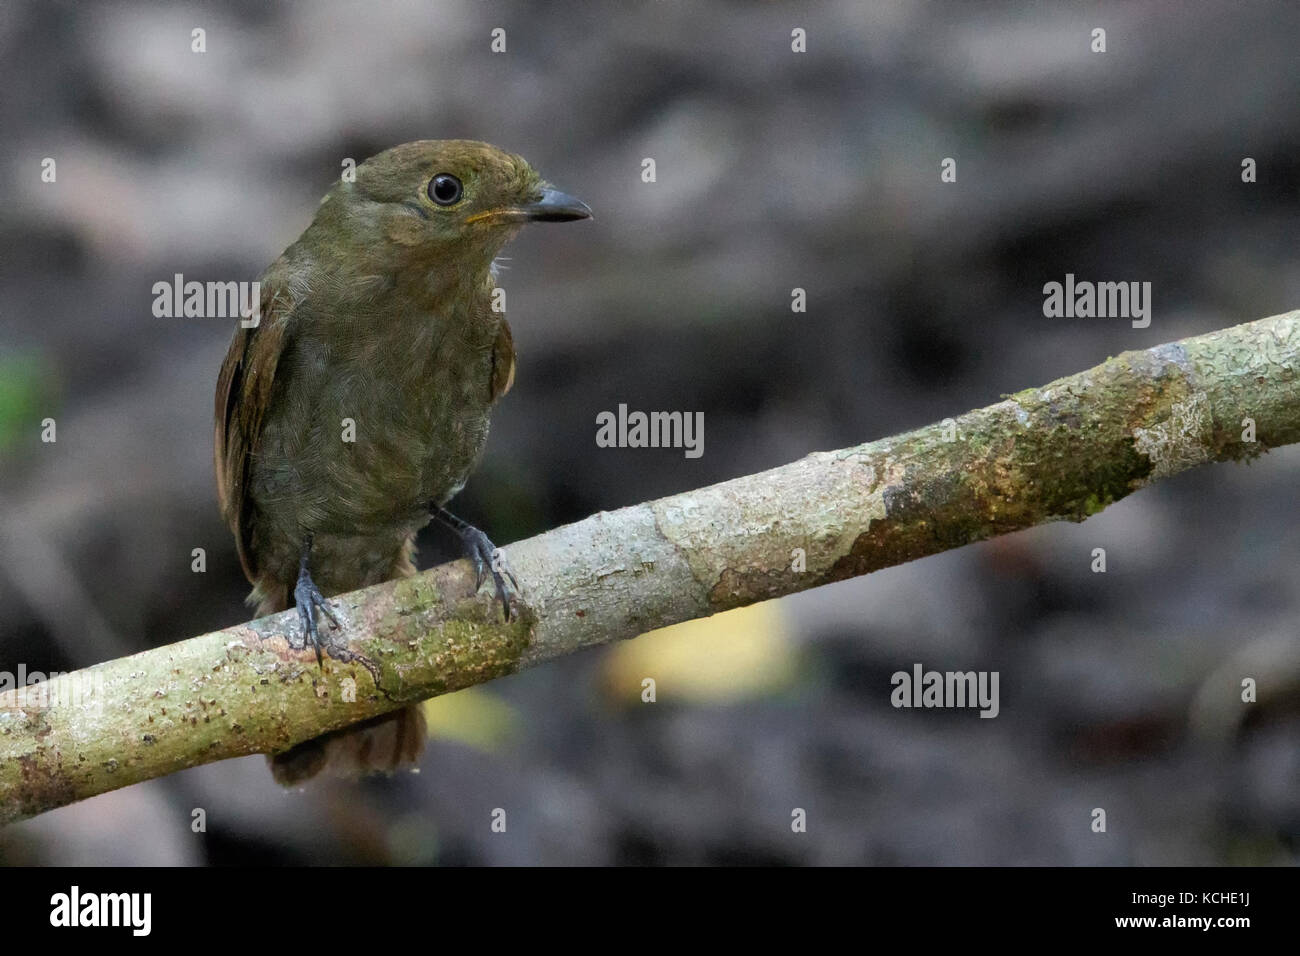 Brown-winged Schiffornis (Schiffornis turdina) perched on a branch in the Amazon of Brazil. Stock Photo